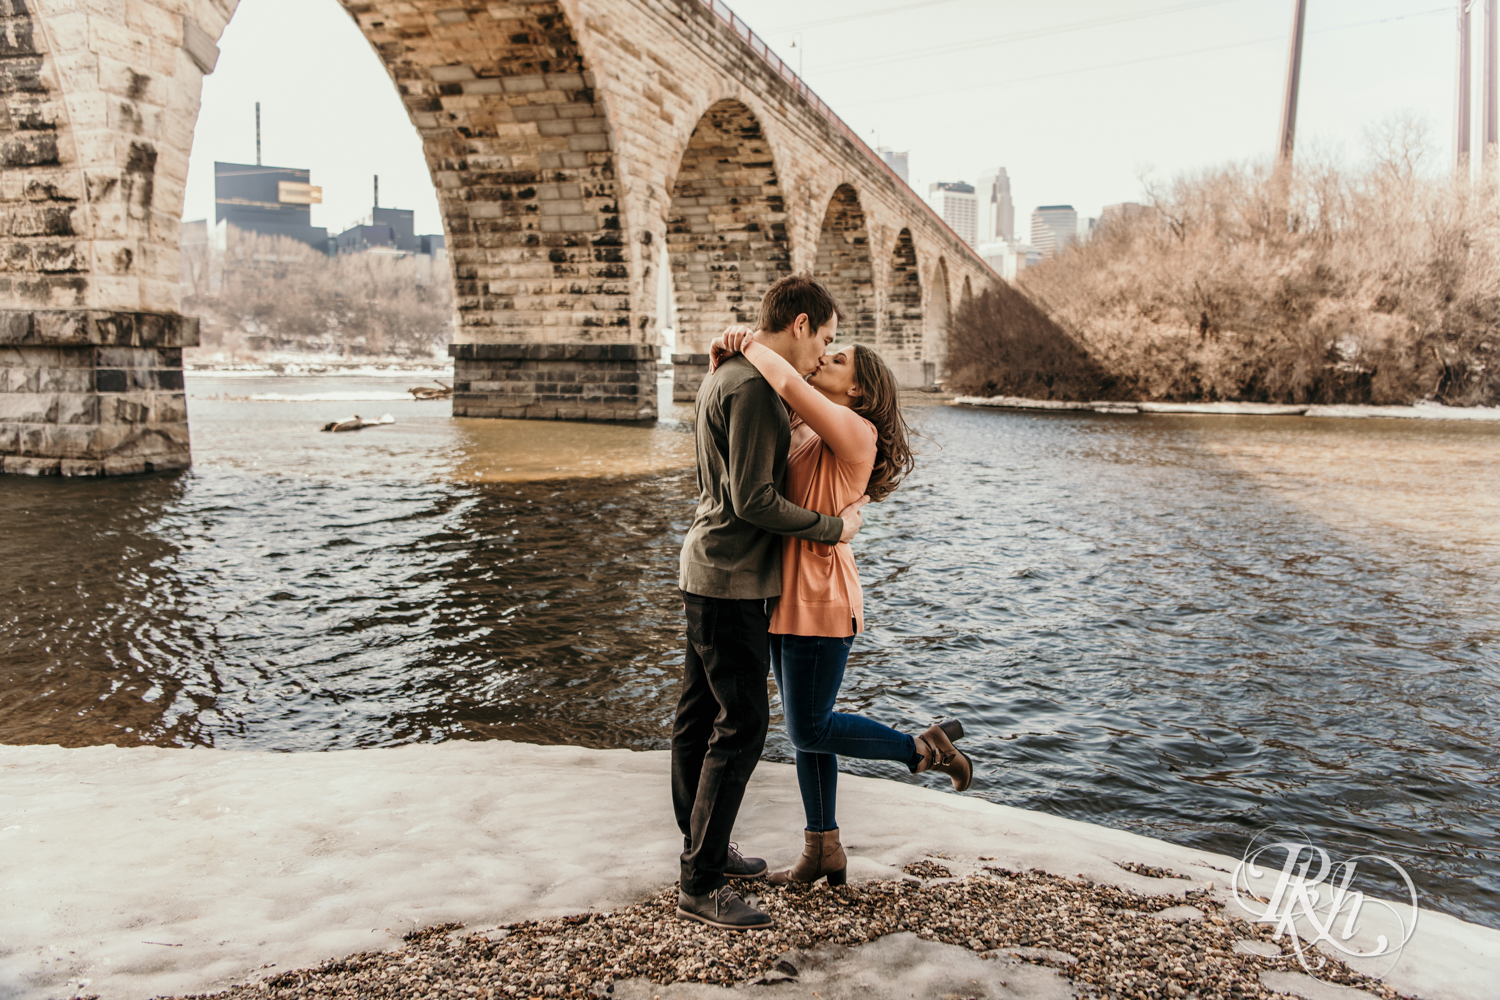 Man and women in sweater and jeans kiss in snow under Stone Arch Bridge in front of river in Minneapolis, Minnesota.